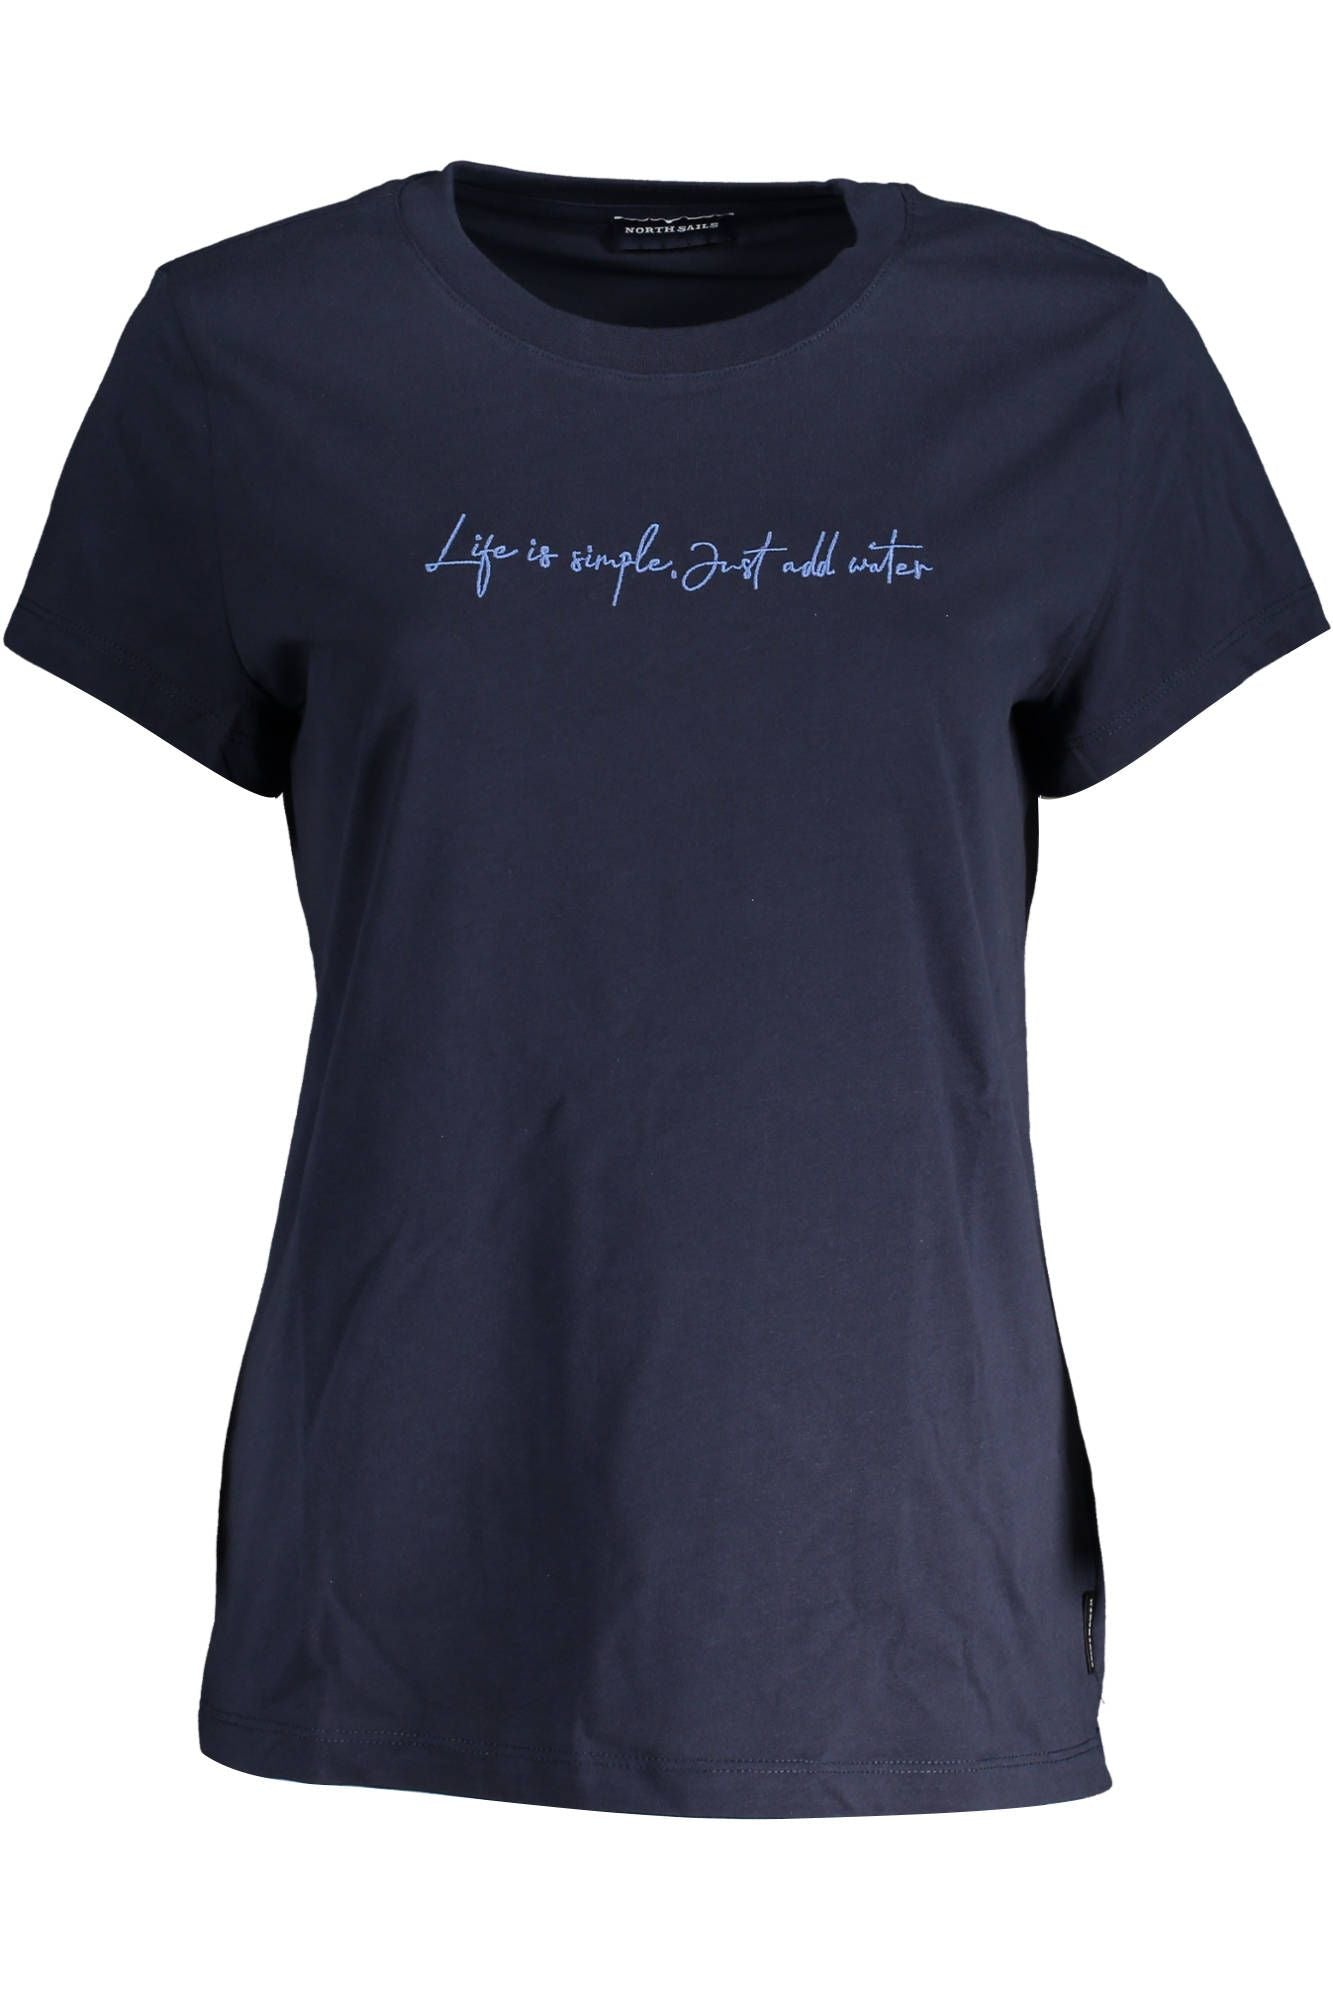 North Sails Chic Blue Organic Cotton Tee with Signature Embroidery